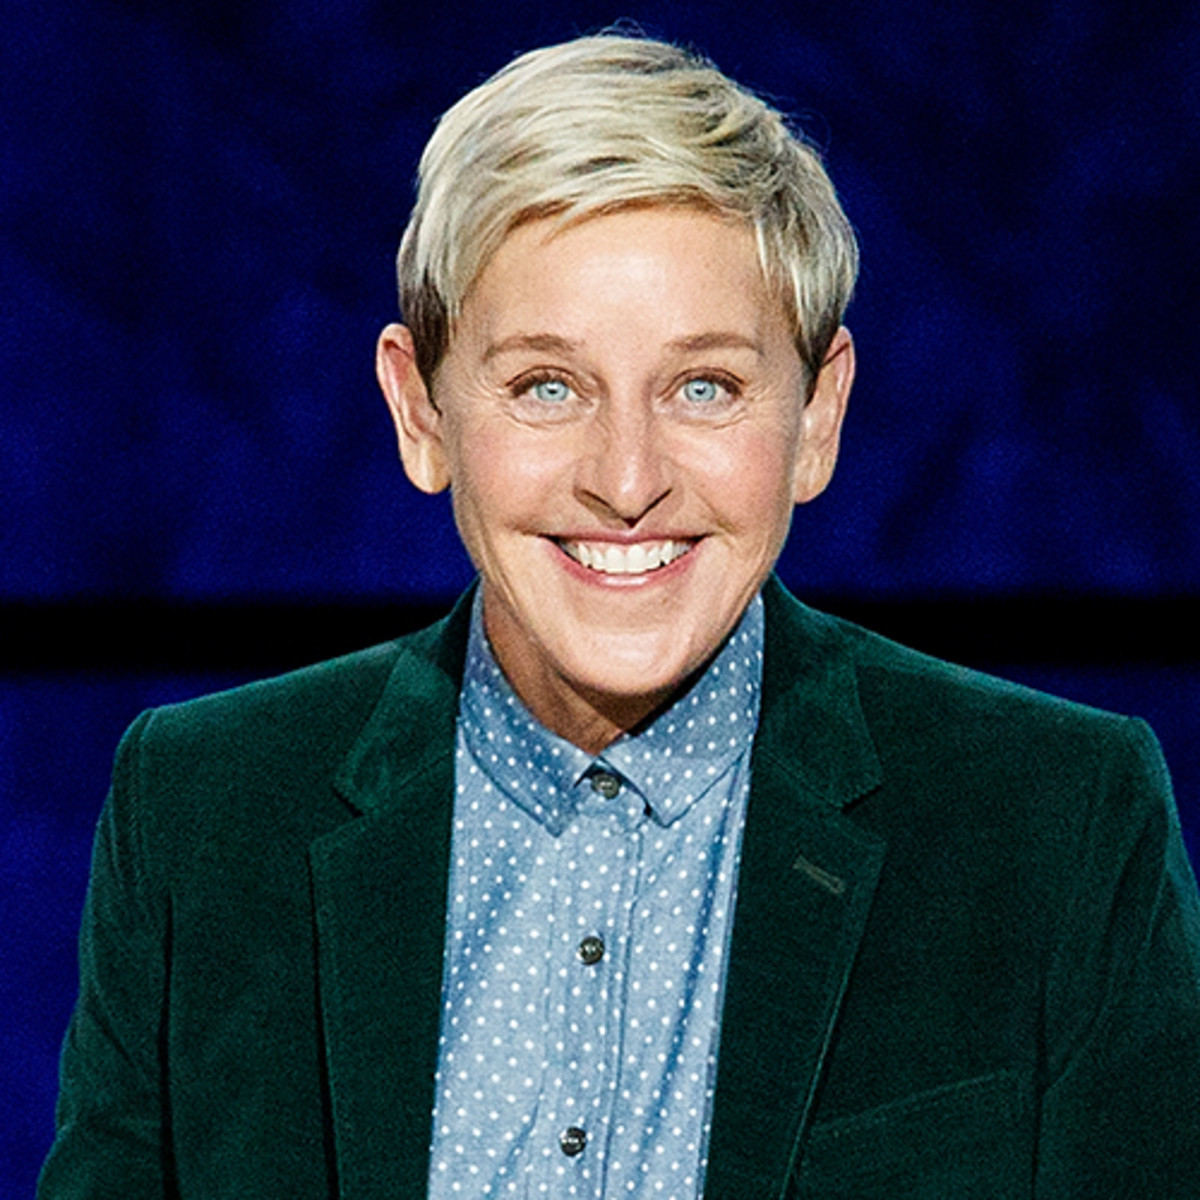 Ellen DeGeneres will end her talk show after 19 years due to a slew of toxic workplace accusations